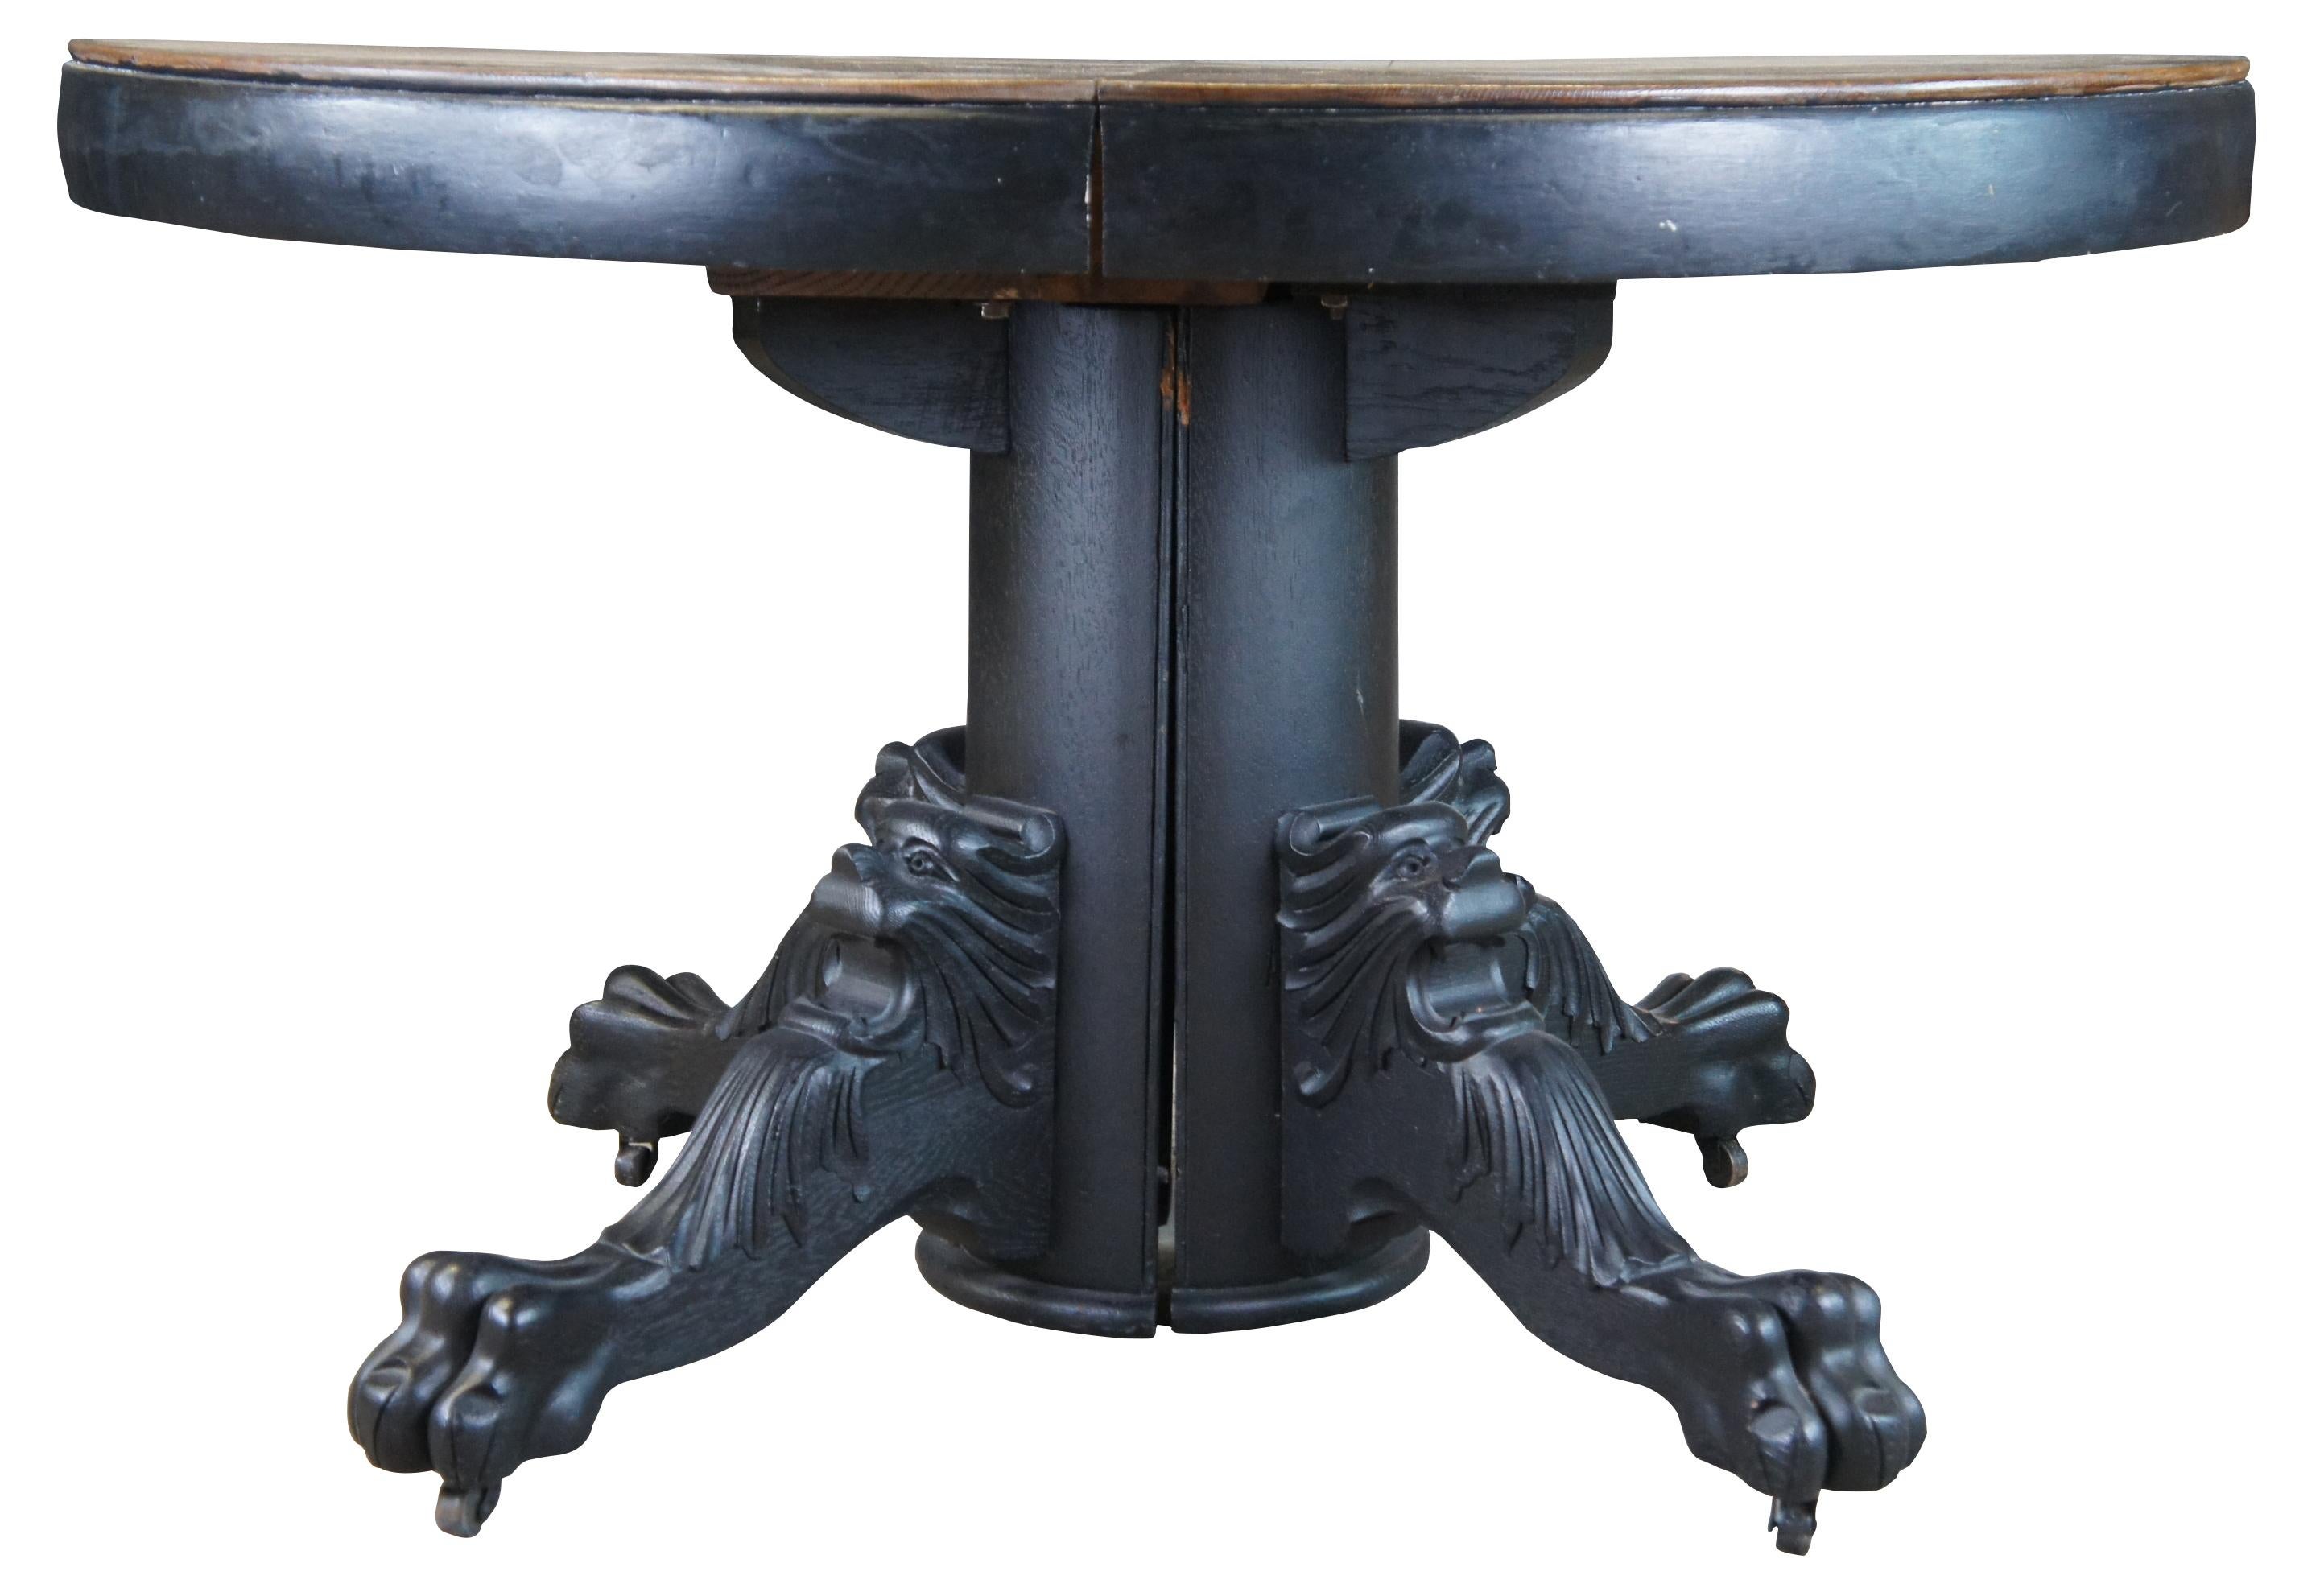 Antique Victorian Gothic Revival extendable dining table. Made of oak featuring round or oval form with carved lion and claw foot base. Includes one 12